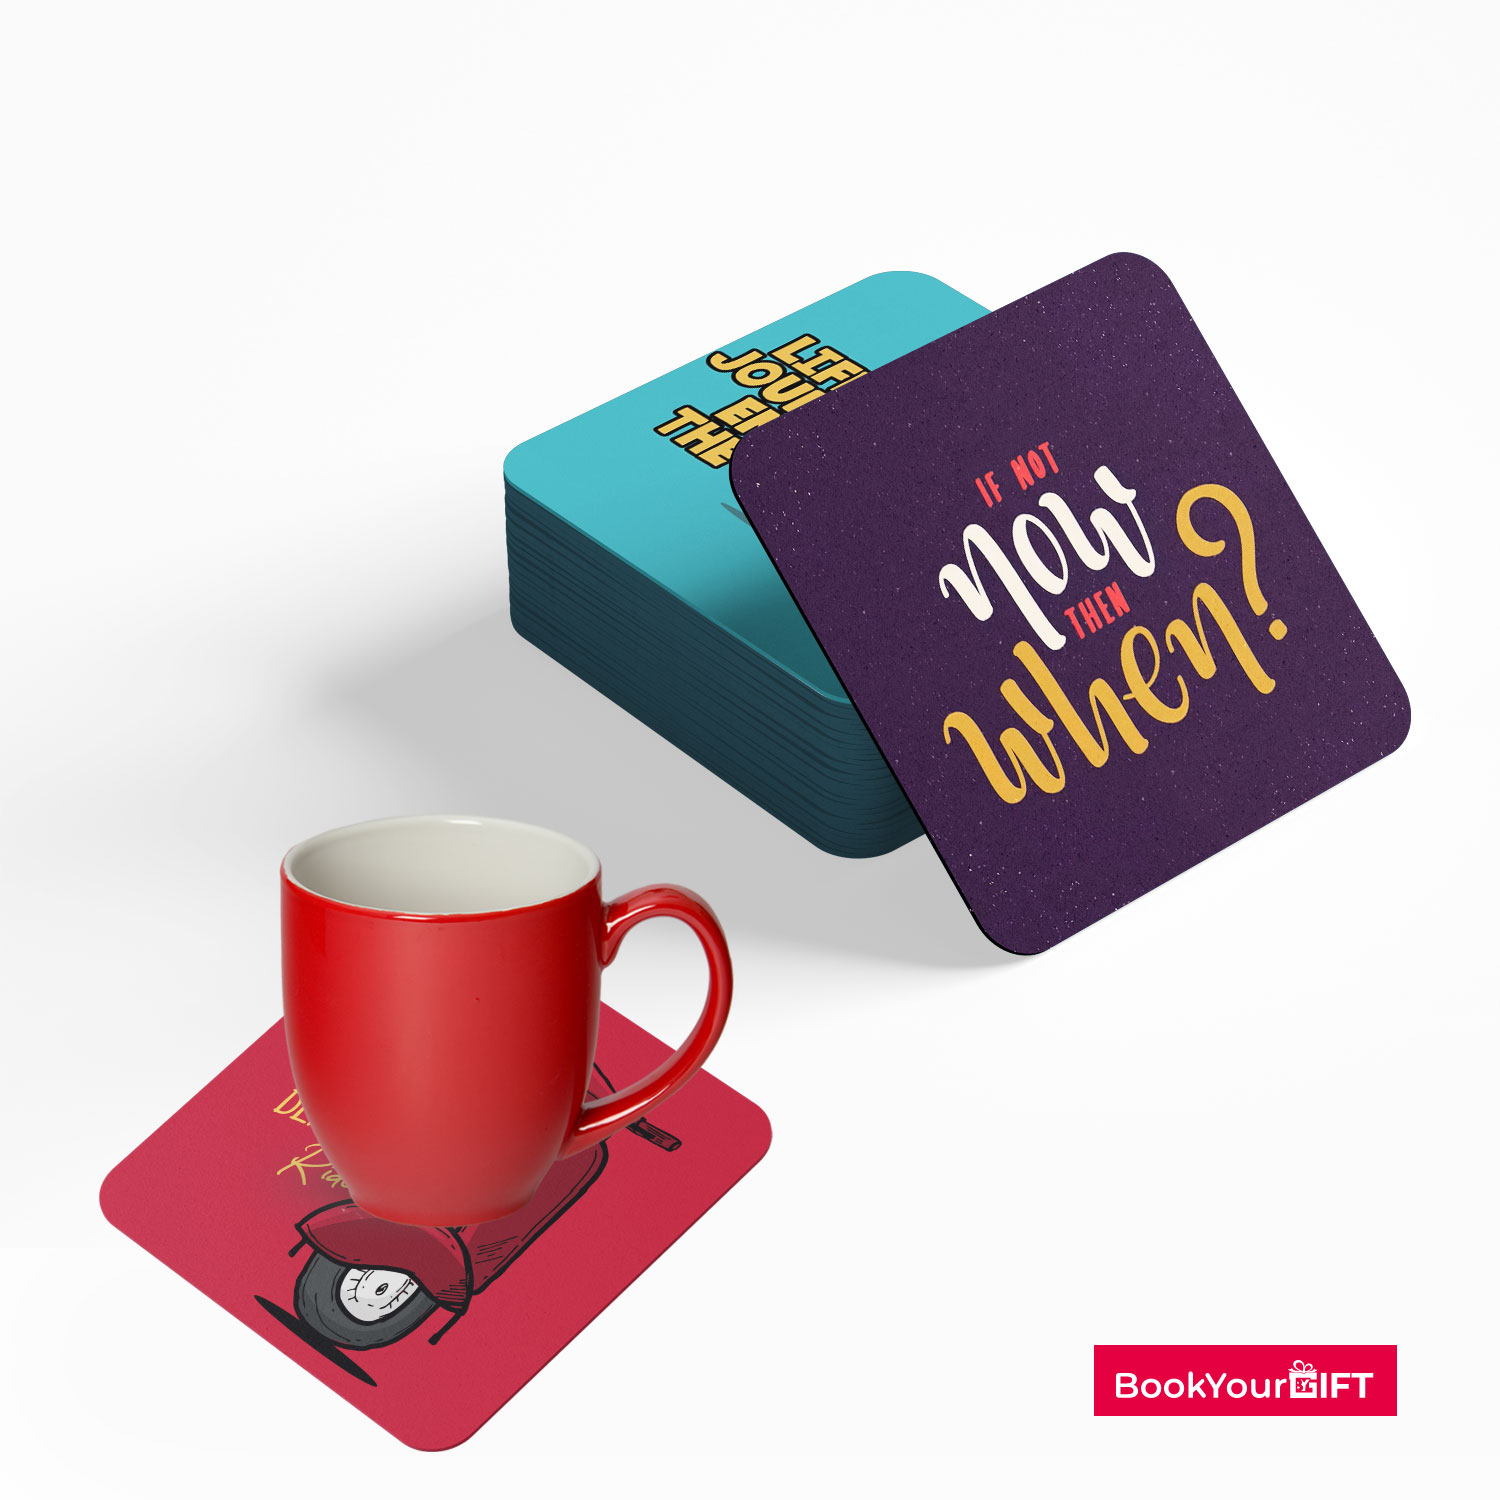 Quirky Cool Coaster Set of 6